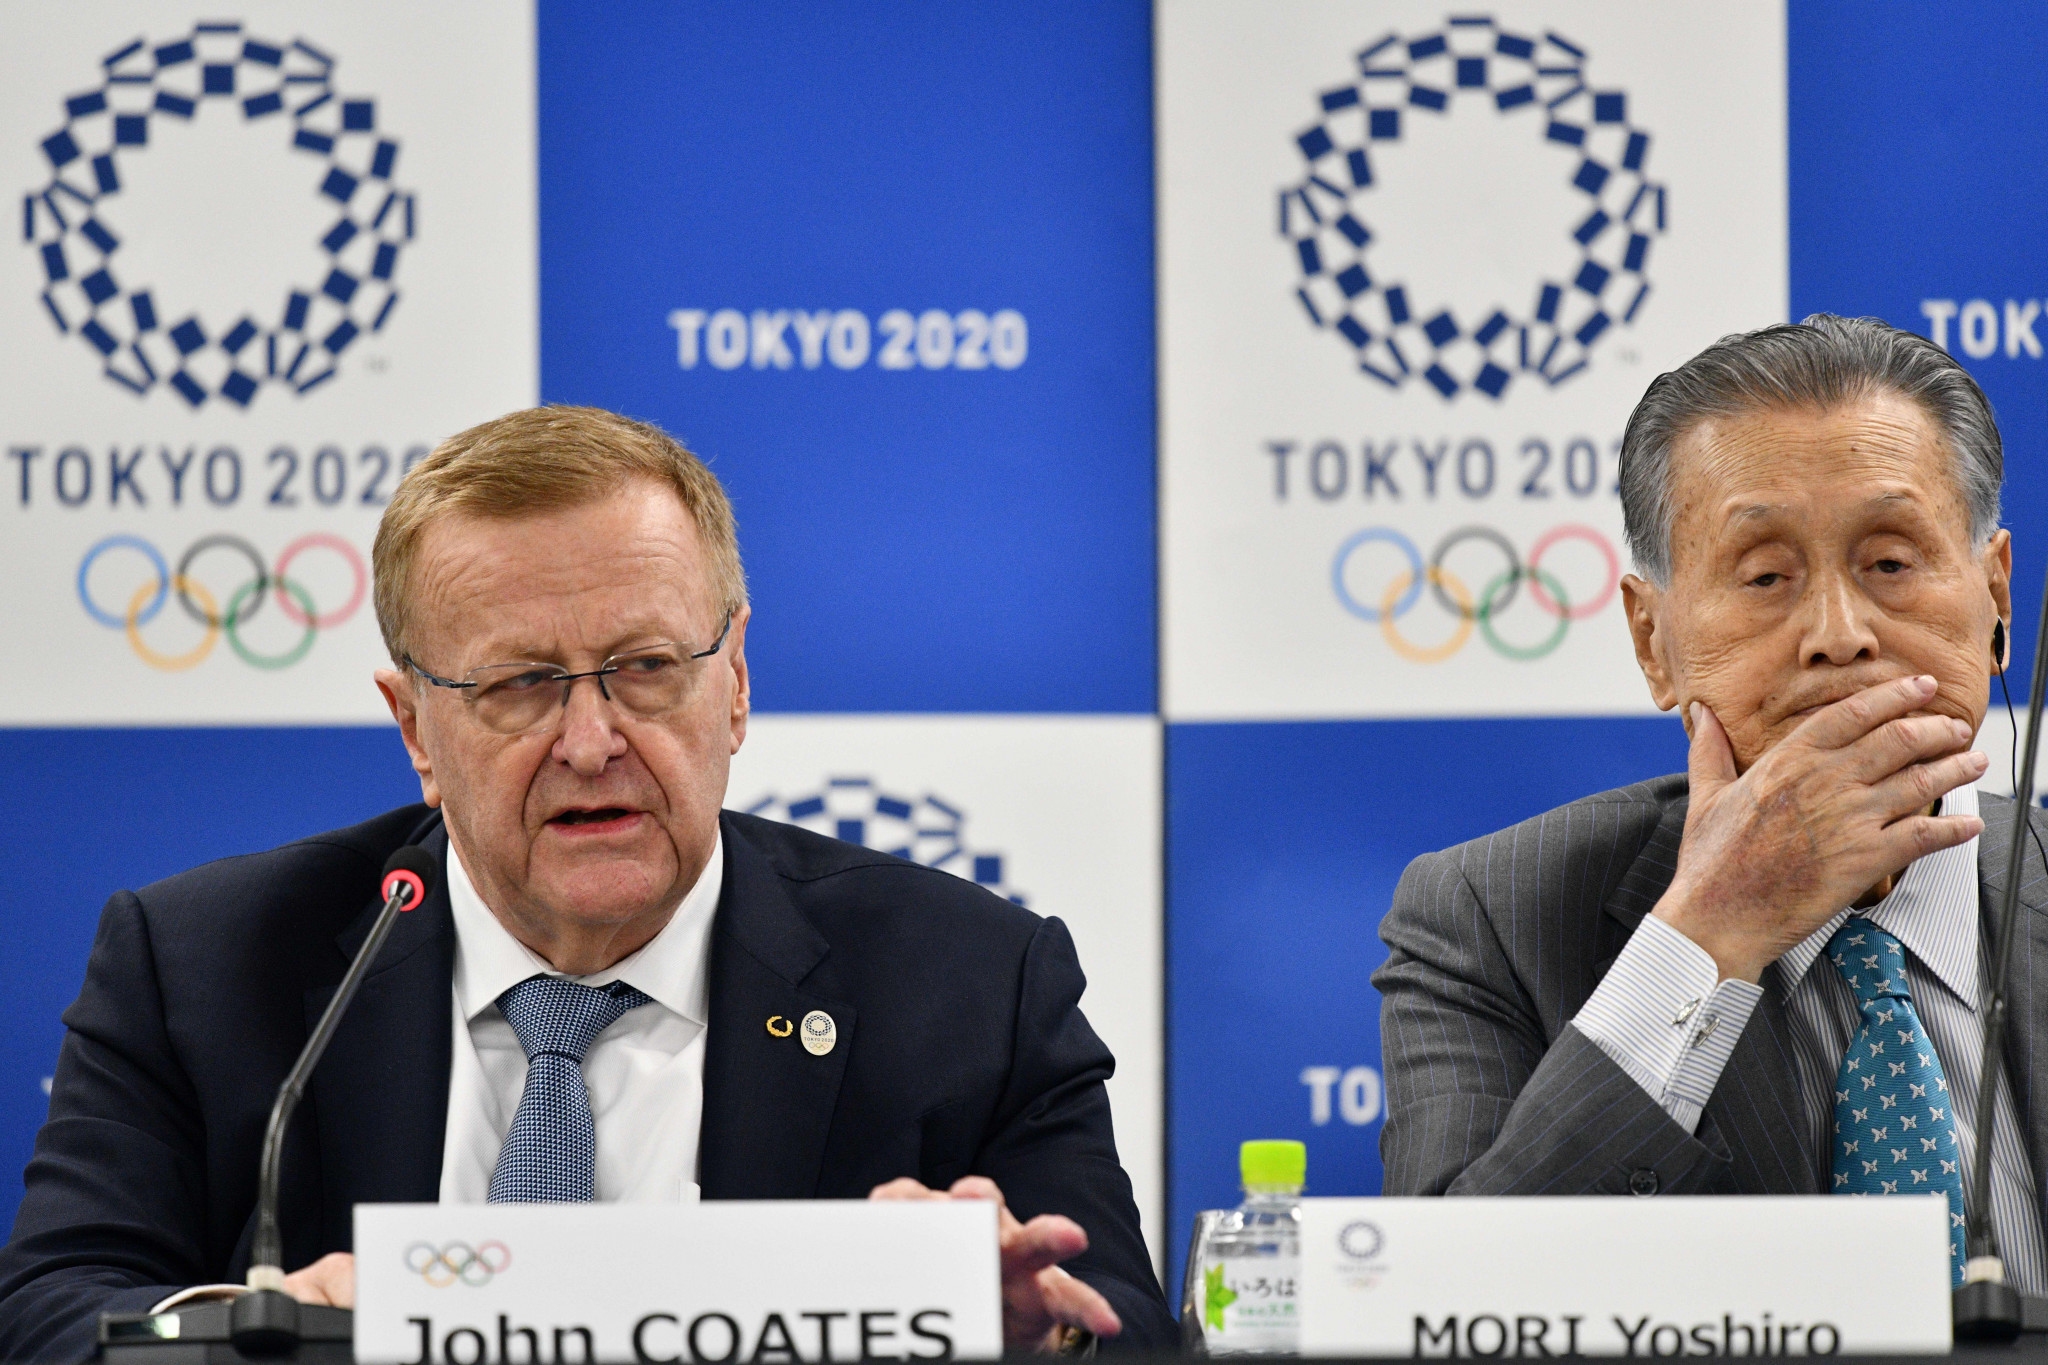 Confirmation of the start time for the cross-country eventing came following a two-day IOC project review of Tokyo 2020, where measures dealing with the severe heat expected during the Olympic Games were discussed ©Getty Images